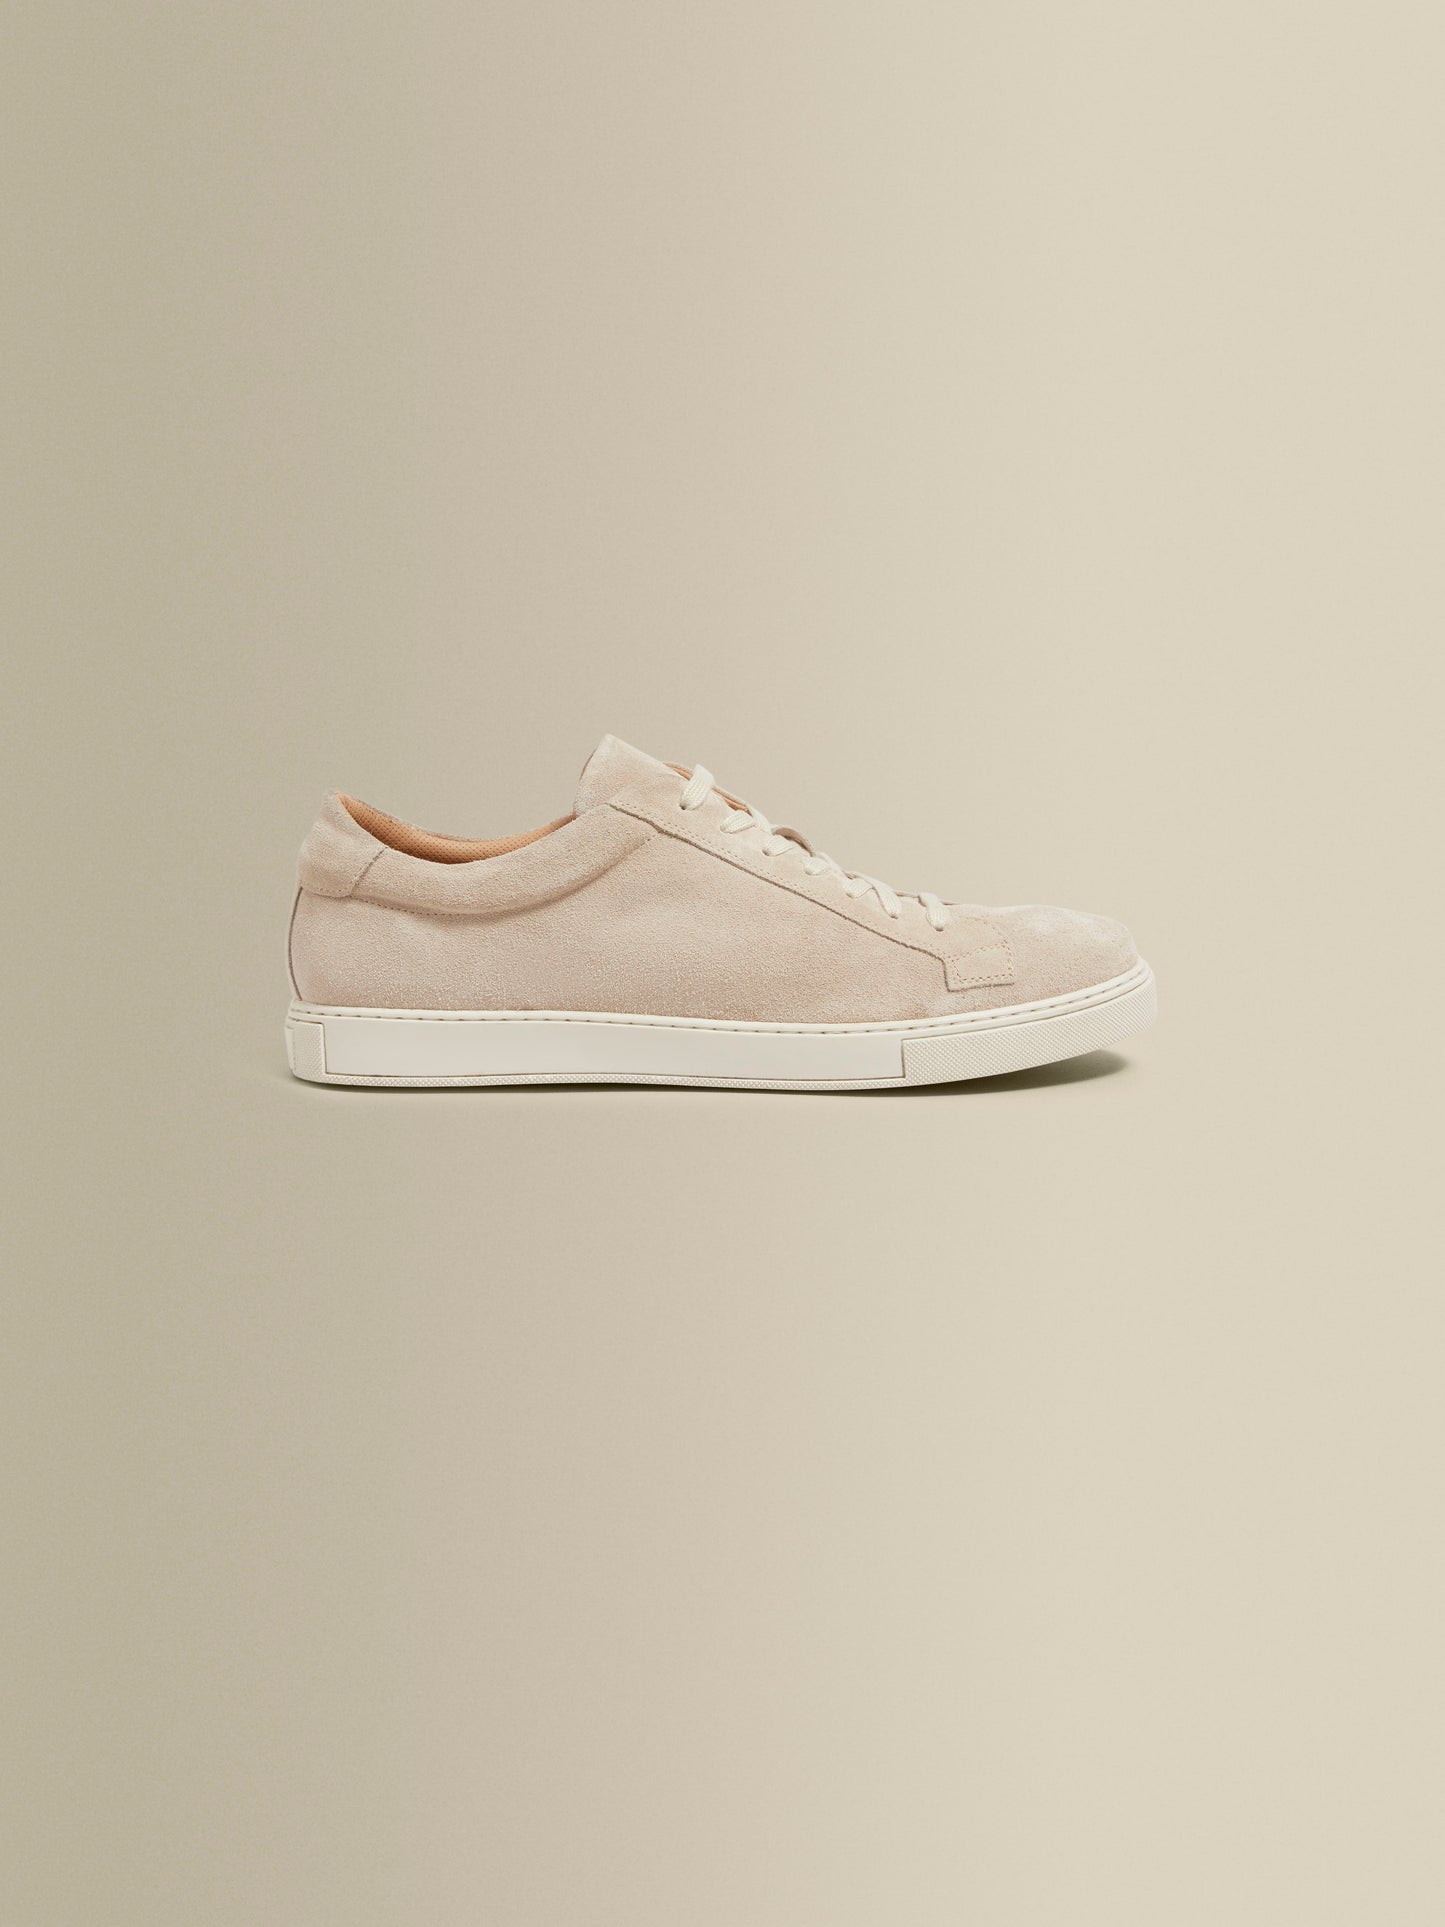 Suede Sneakers Oat Side Product Image